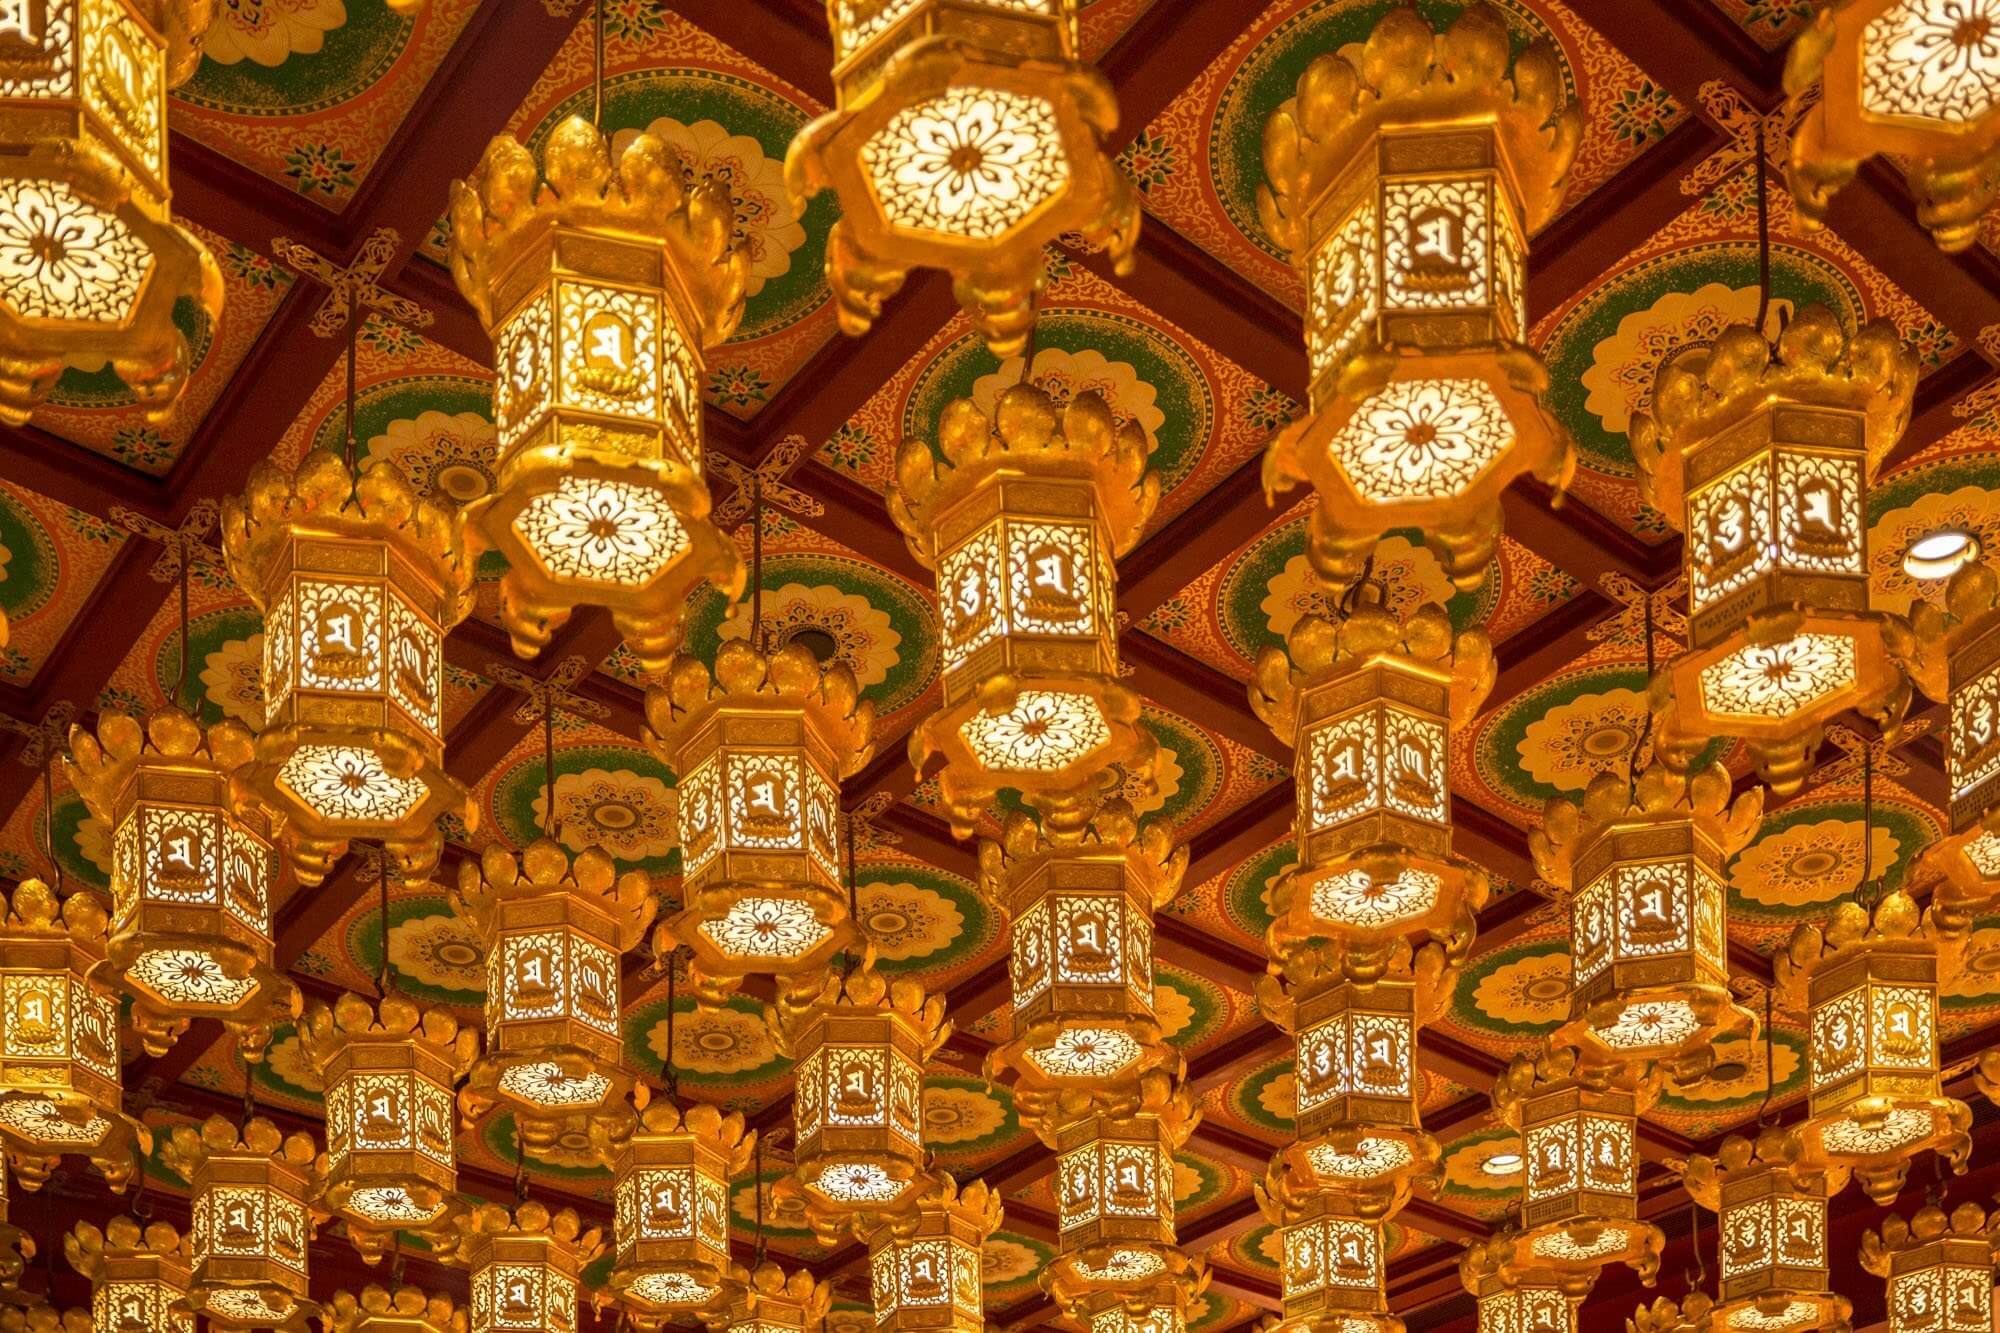 Detail of the ceiling lighting in the Buddha Tooth Relic Temple in Singapore